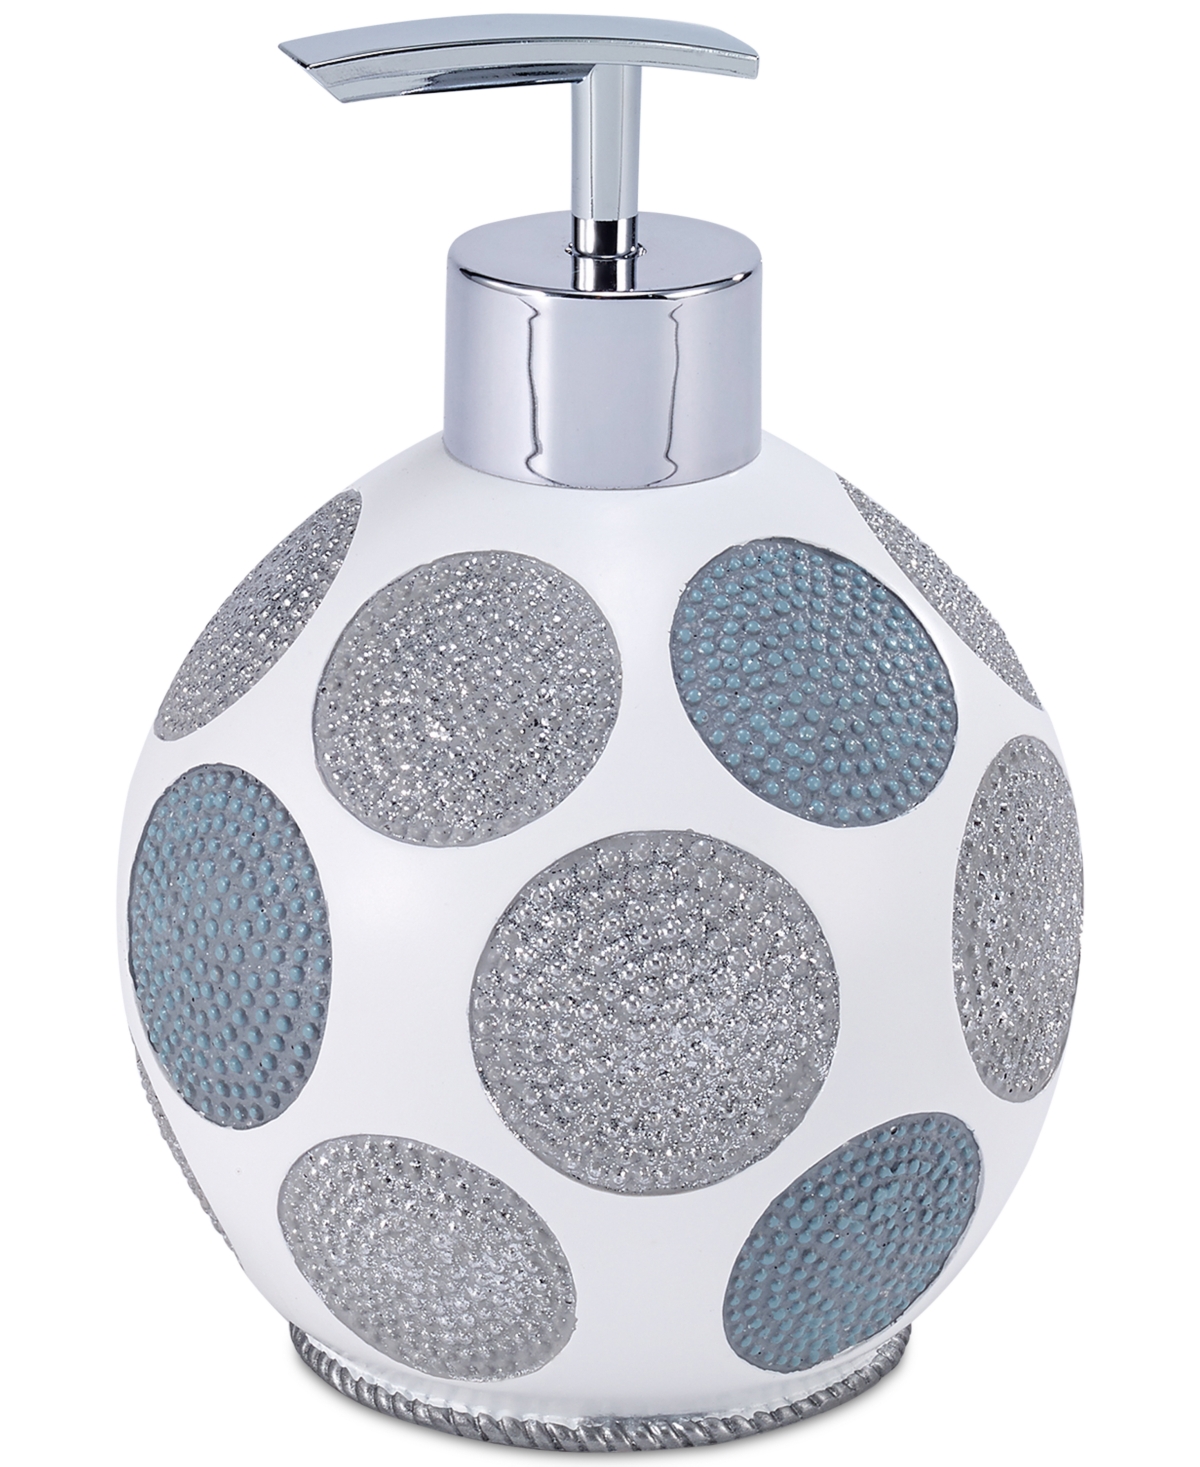 Dotted Circle Textured Resin Soap/Lotion Pump - Blue/Silver